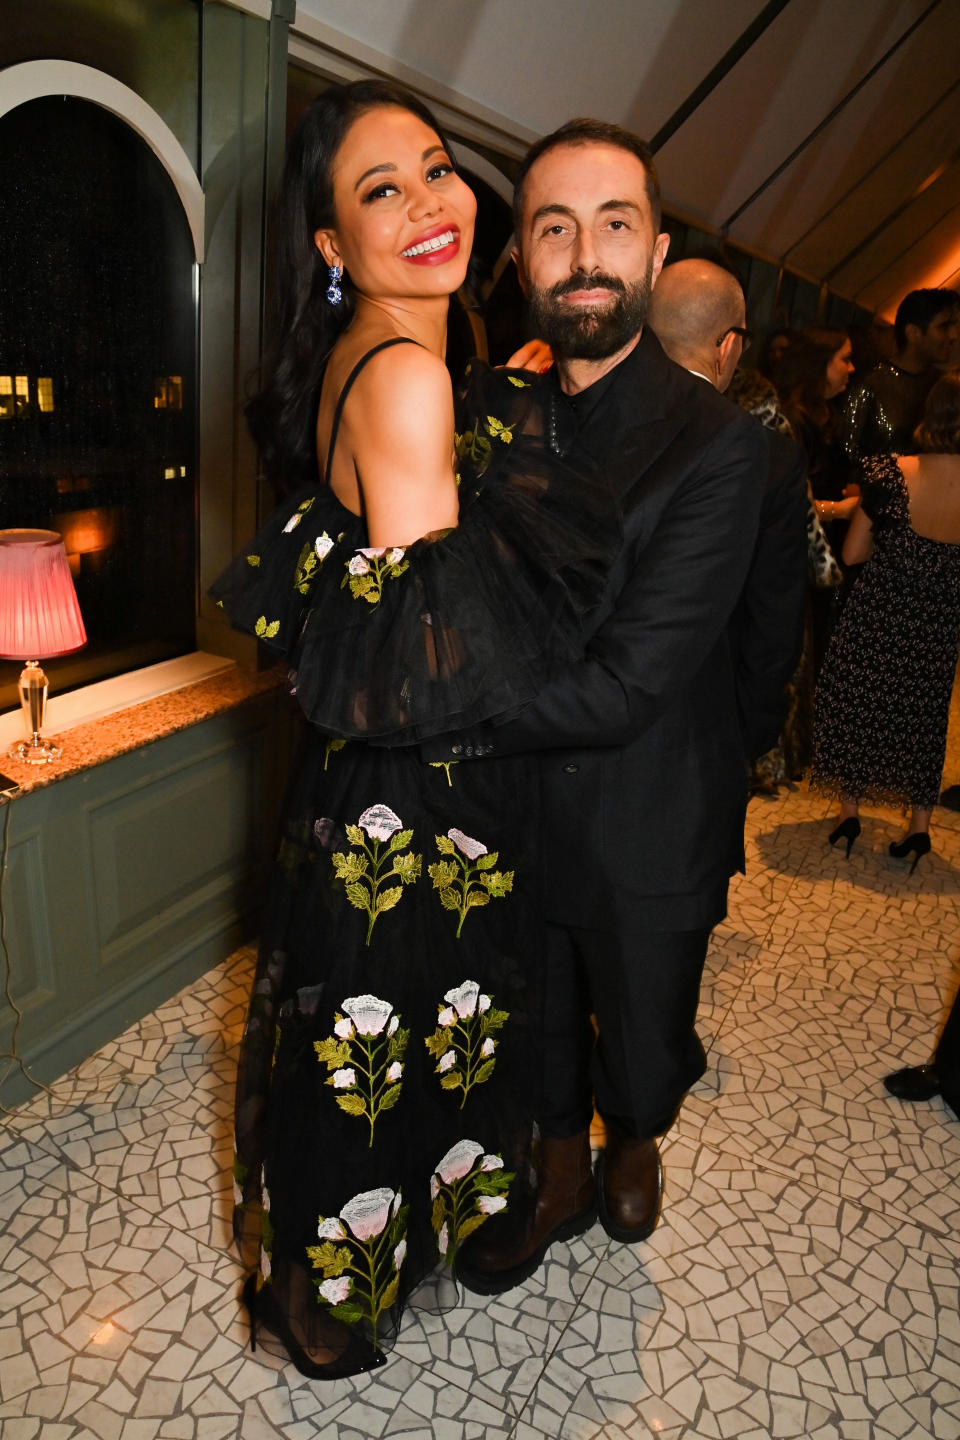 LONDON, ENGLAND - MARCH 23: Emma Weymouth, Marchioness of Bath, and Giambattista Valli attend an intimate dinner celebrating the Giambattista Valli pop-up at Harrods on March 23, 2023 in London, England.. (Photo by Dave Benett/Getty Images for Giambattista Valli)